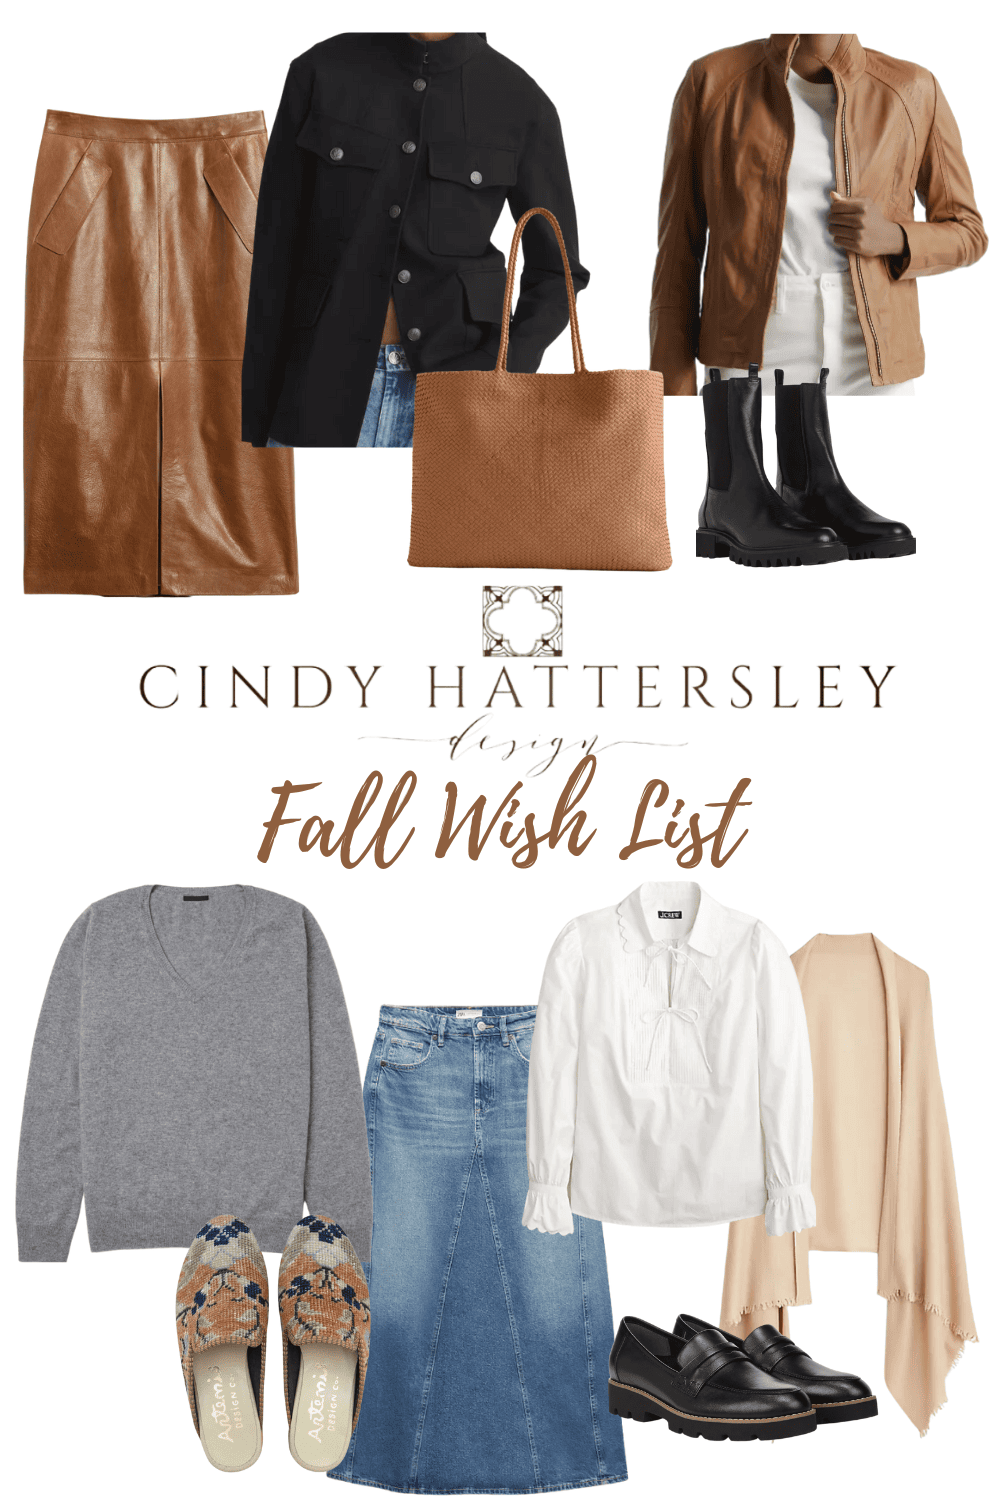 Curated Fall Wish List for Stylish Women Over 50